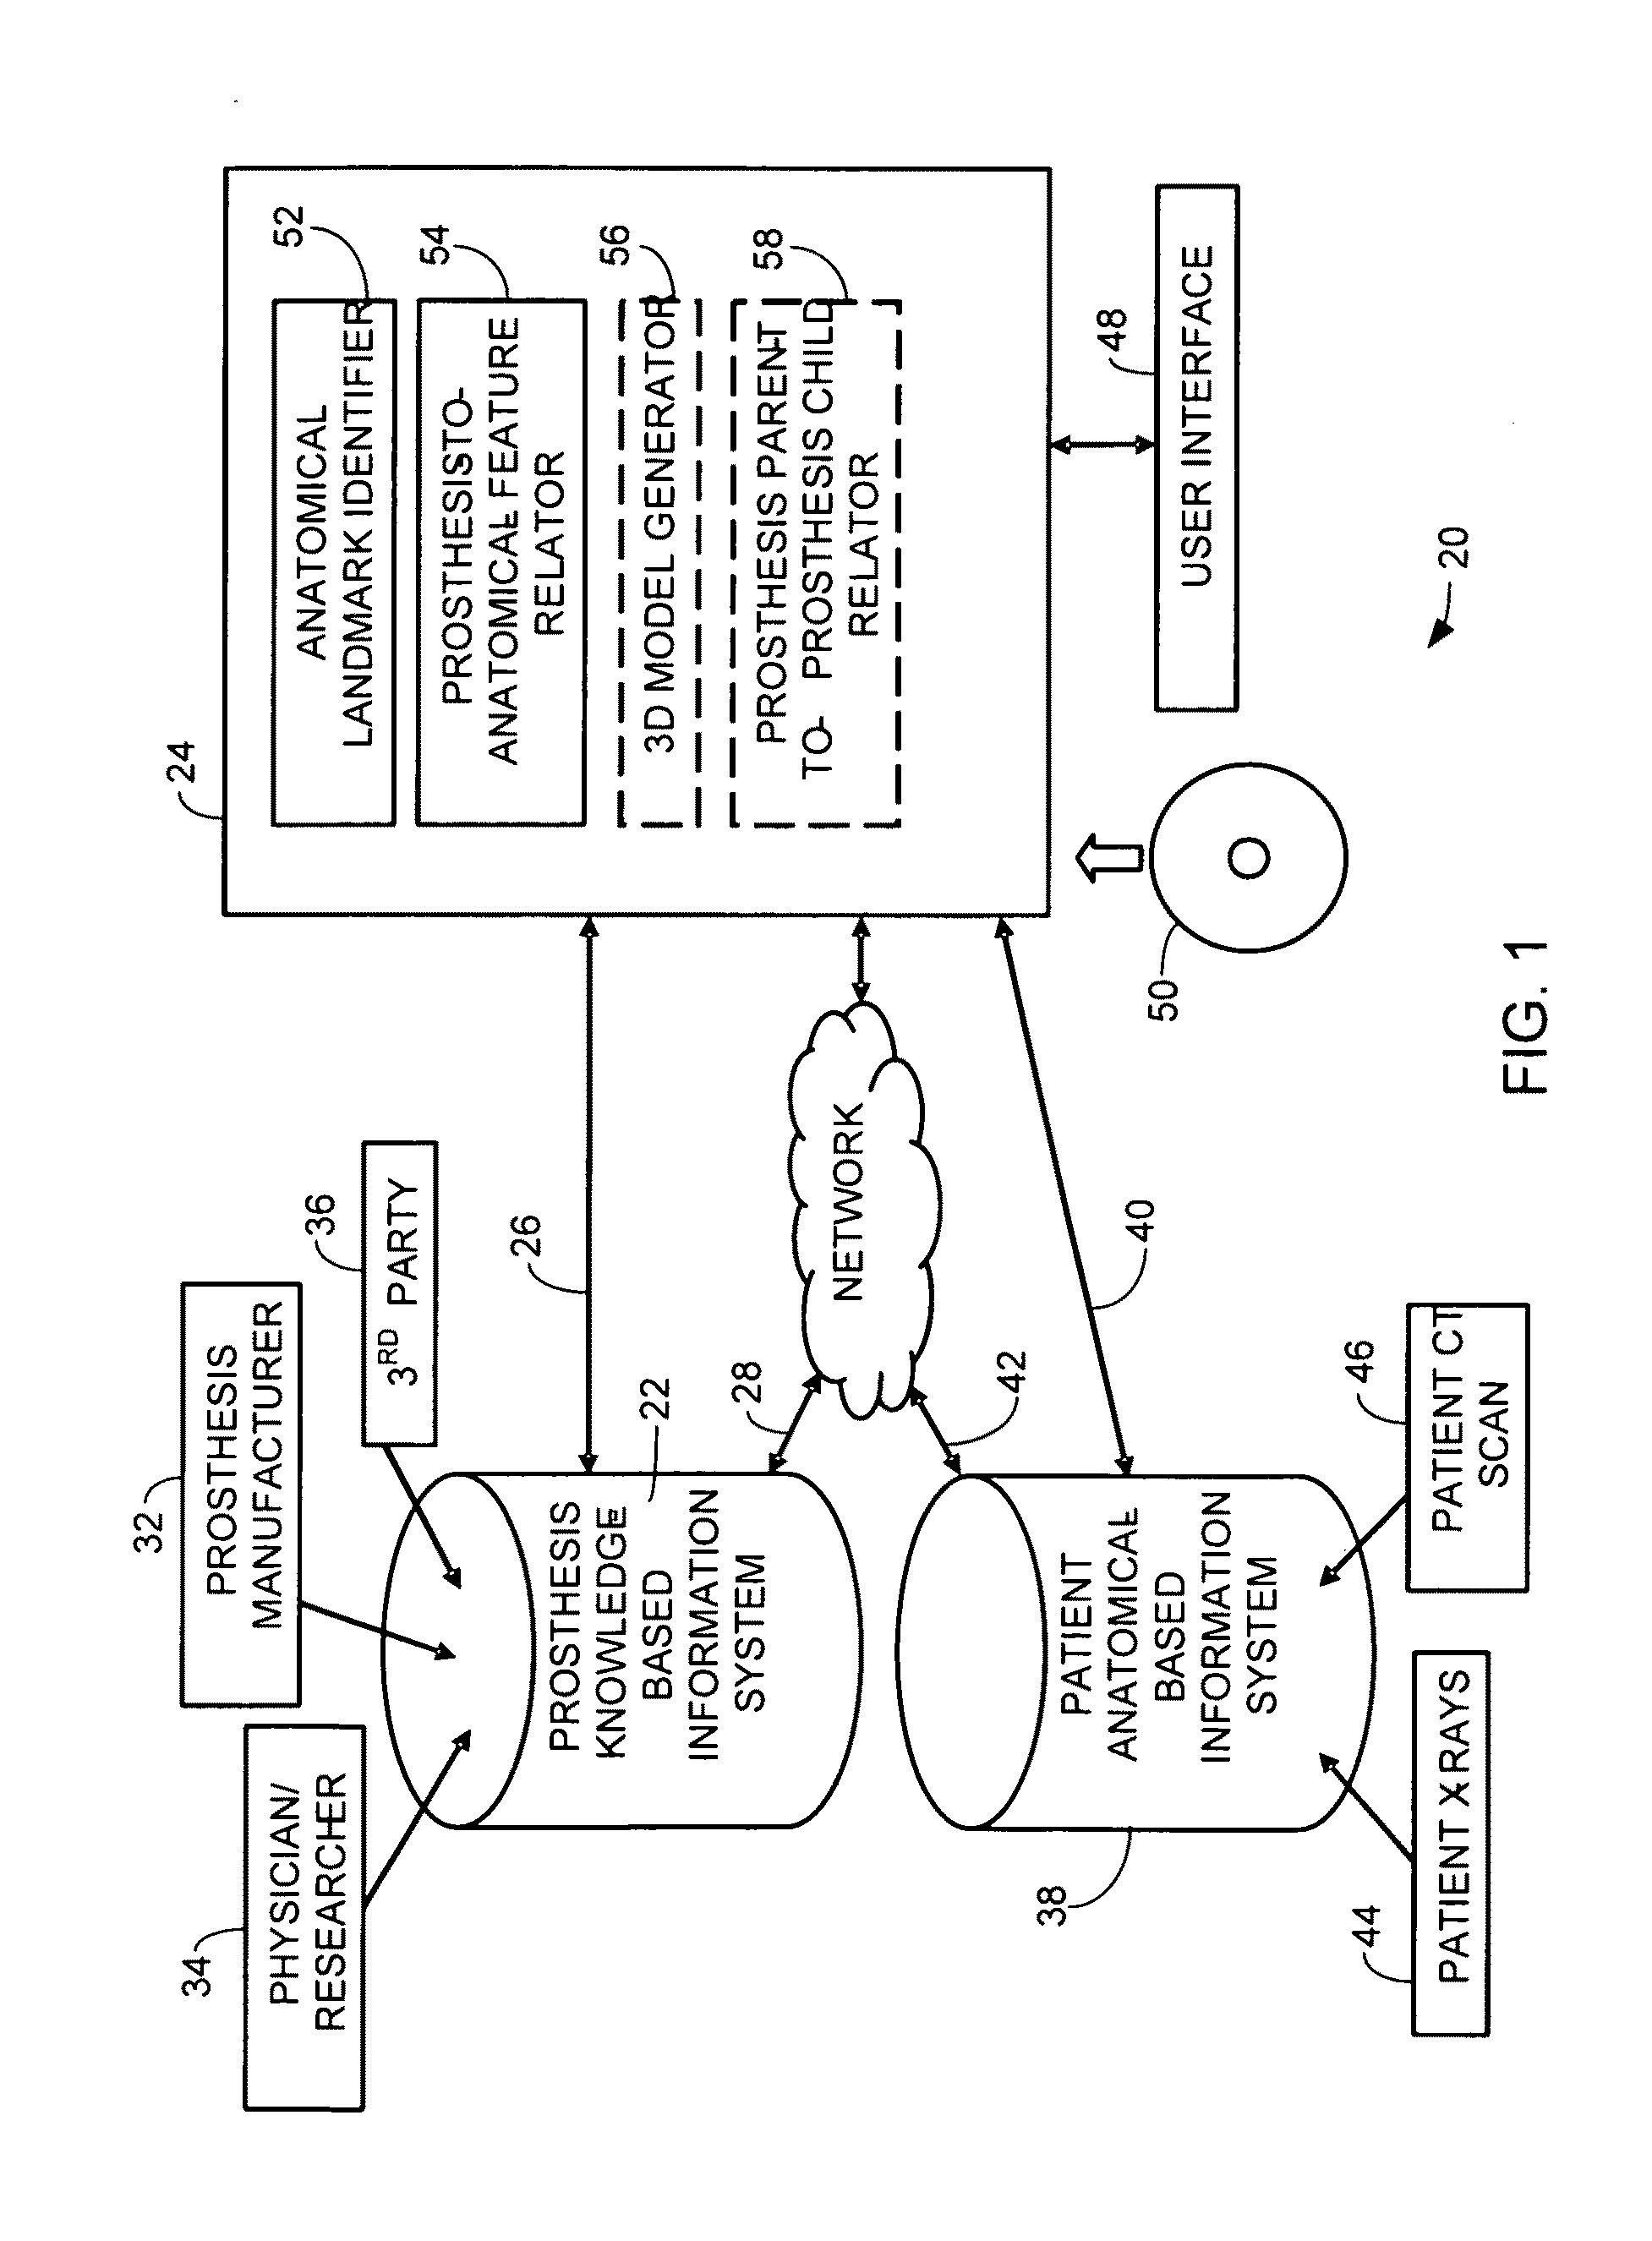 Method and system for surgical planning